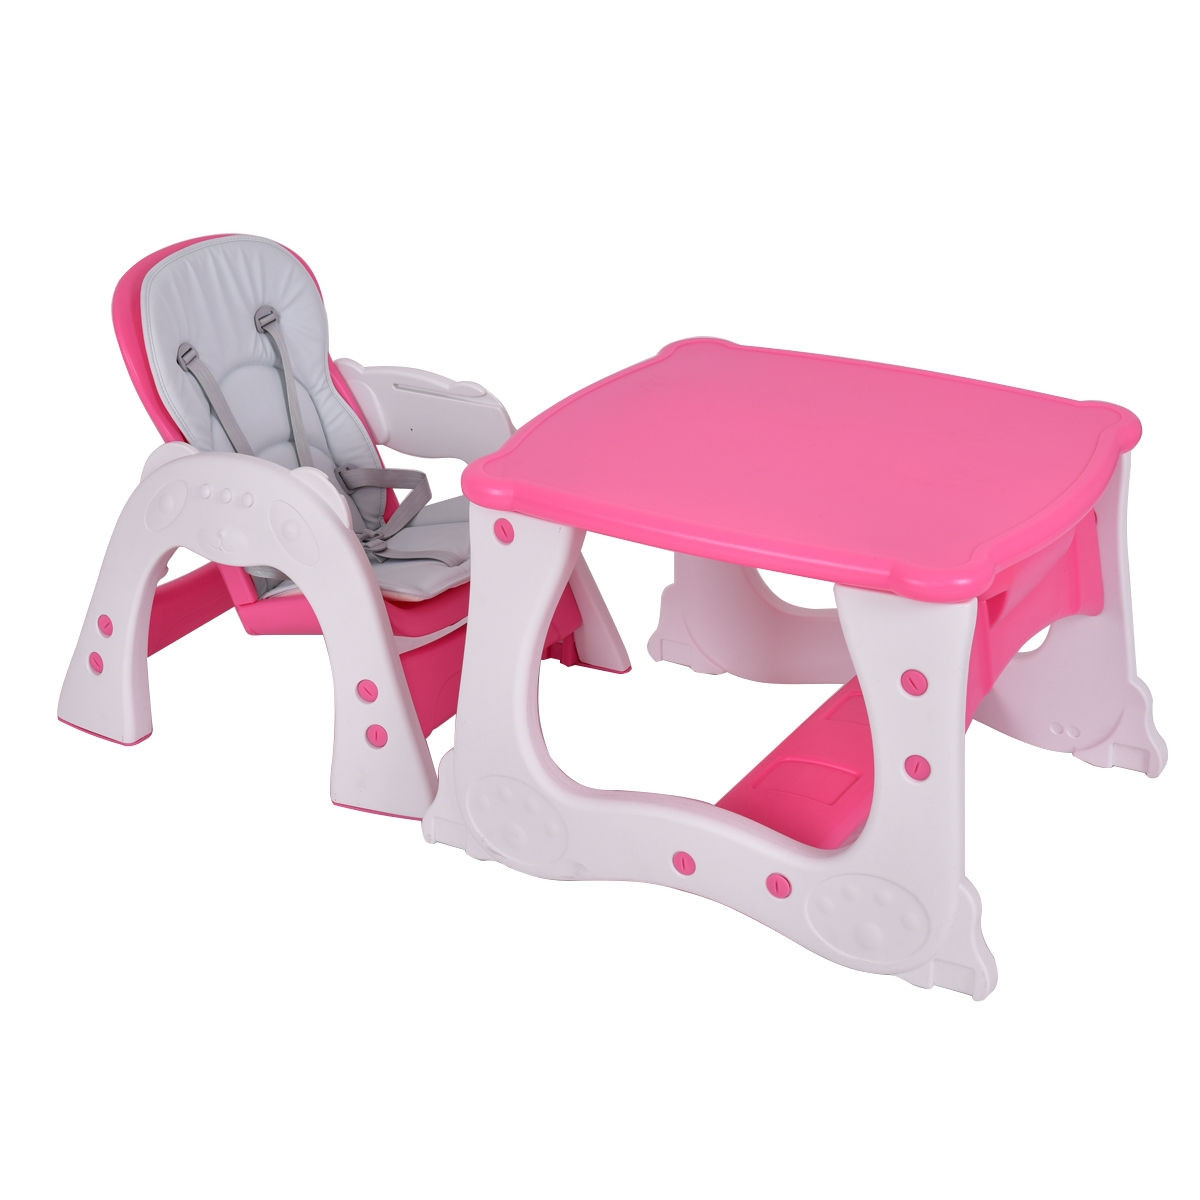 baby chair that connects to table